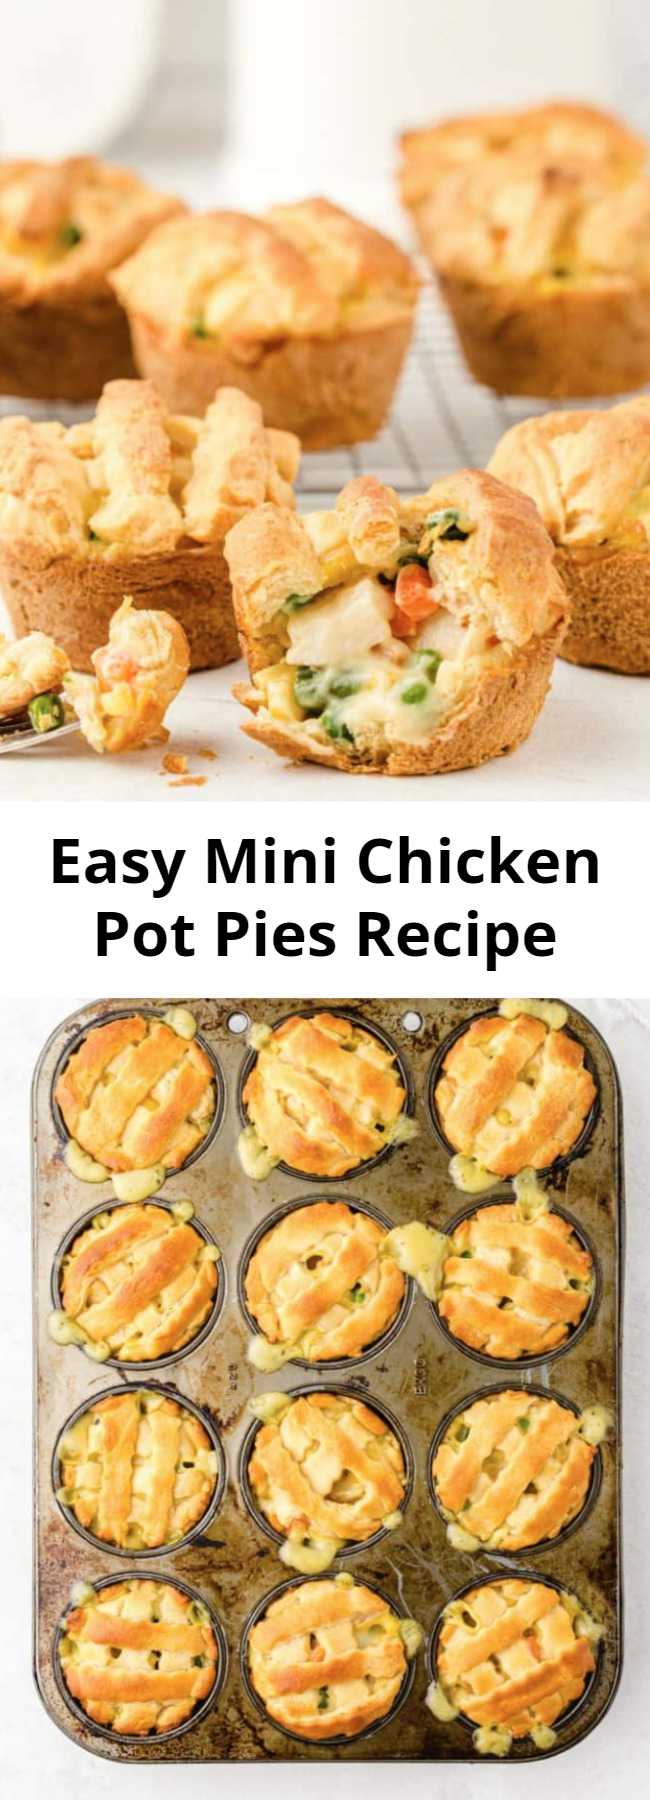 Easy Mini Chicken Pot Pies Recipe - These Mini-Chicken Pot Pies are the perfect comfort food! Perfectly portioned, only need 5-ingredients and they can be ready in just about 30 minutes. Serve them as a delicious bite-sized appetizer or pair them with a small salad for a fun and easy family dinner!